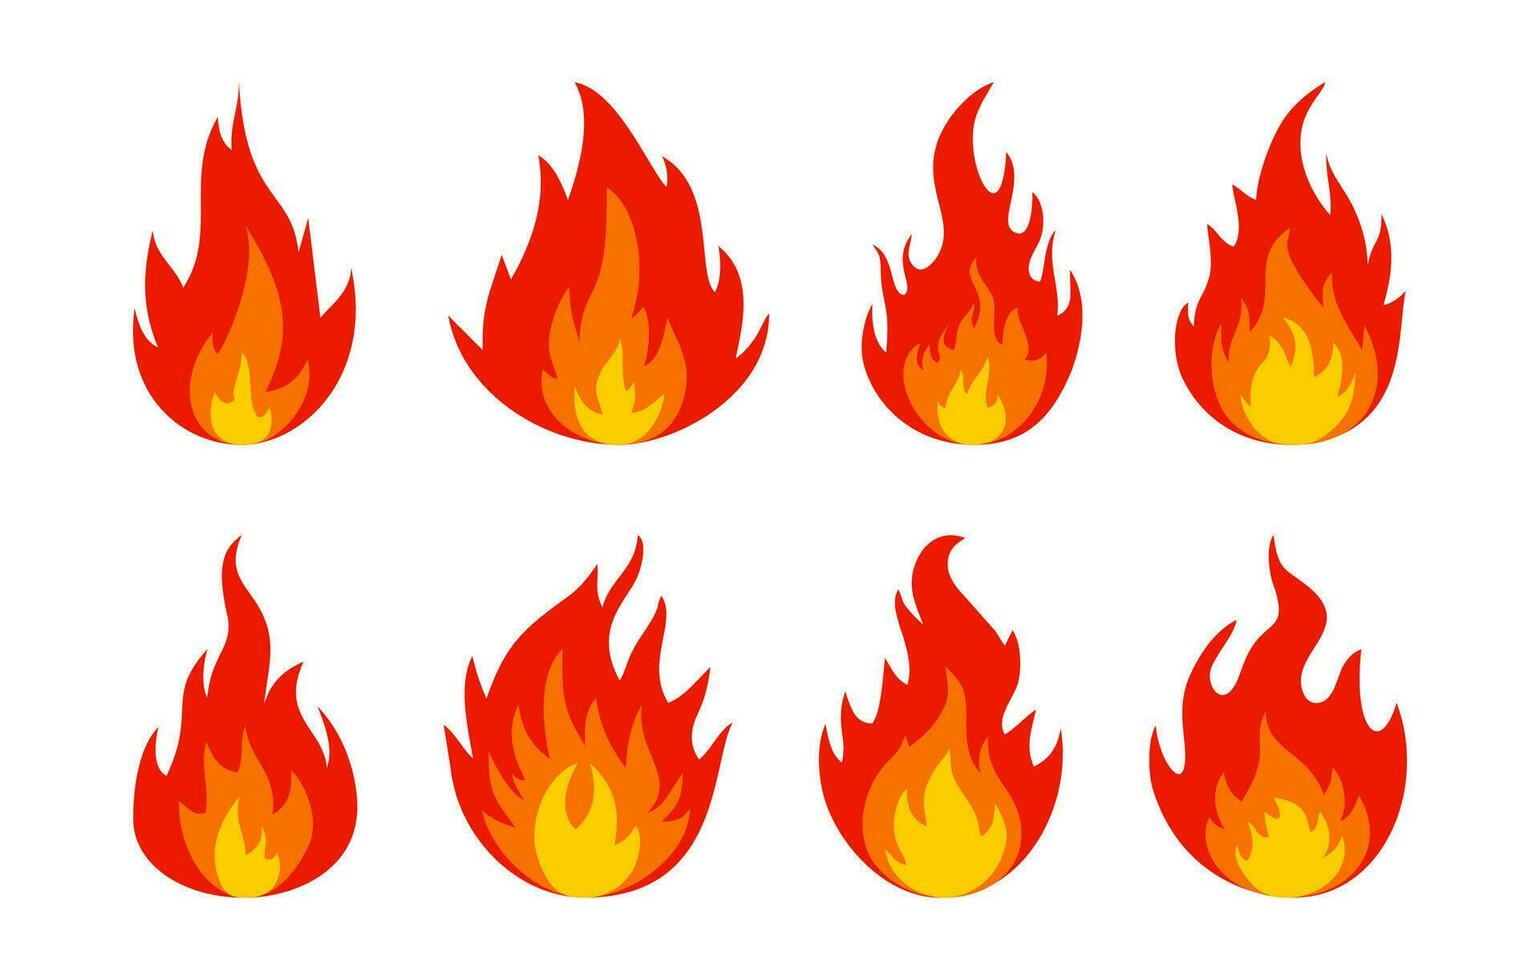 Fire icons. Set of bright burning flame and bonfire icons. Burn sign collection. Vector illustration